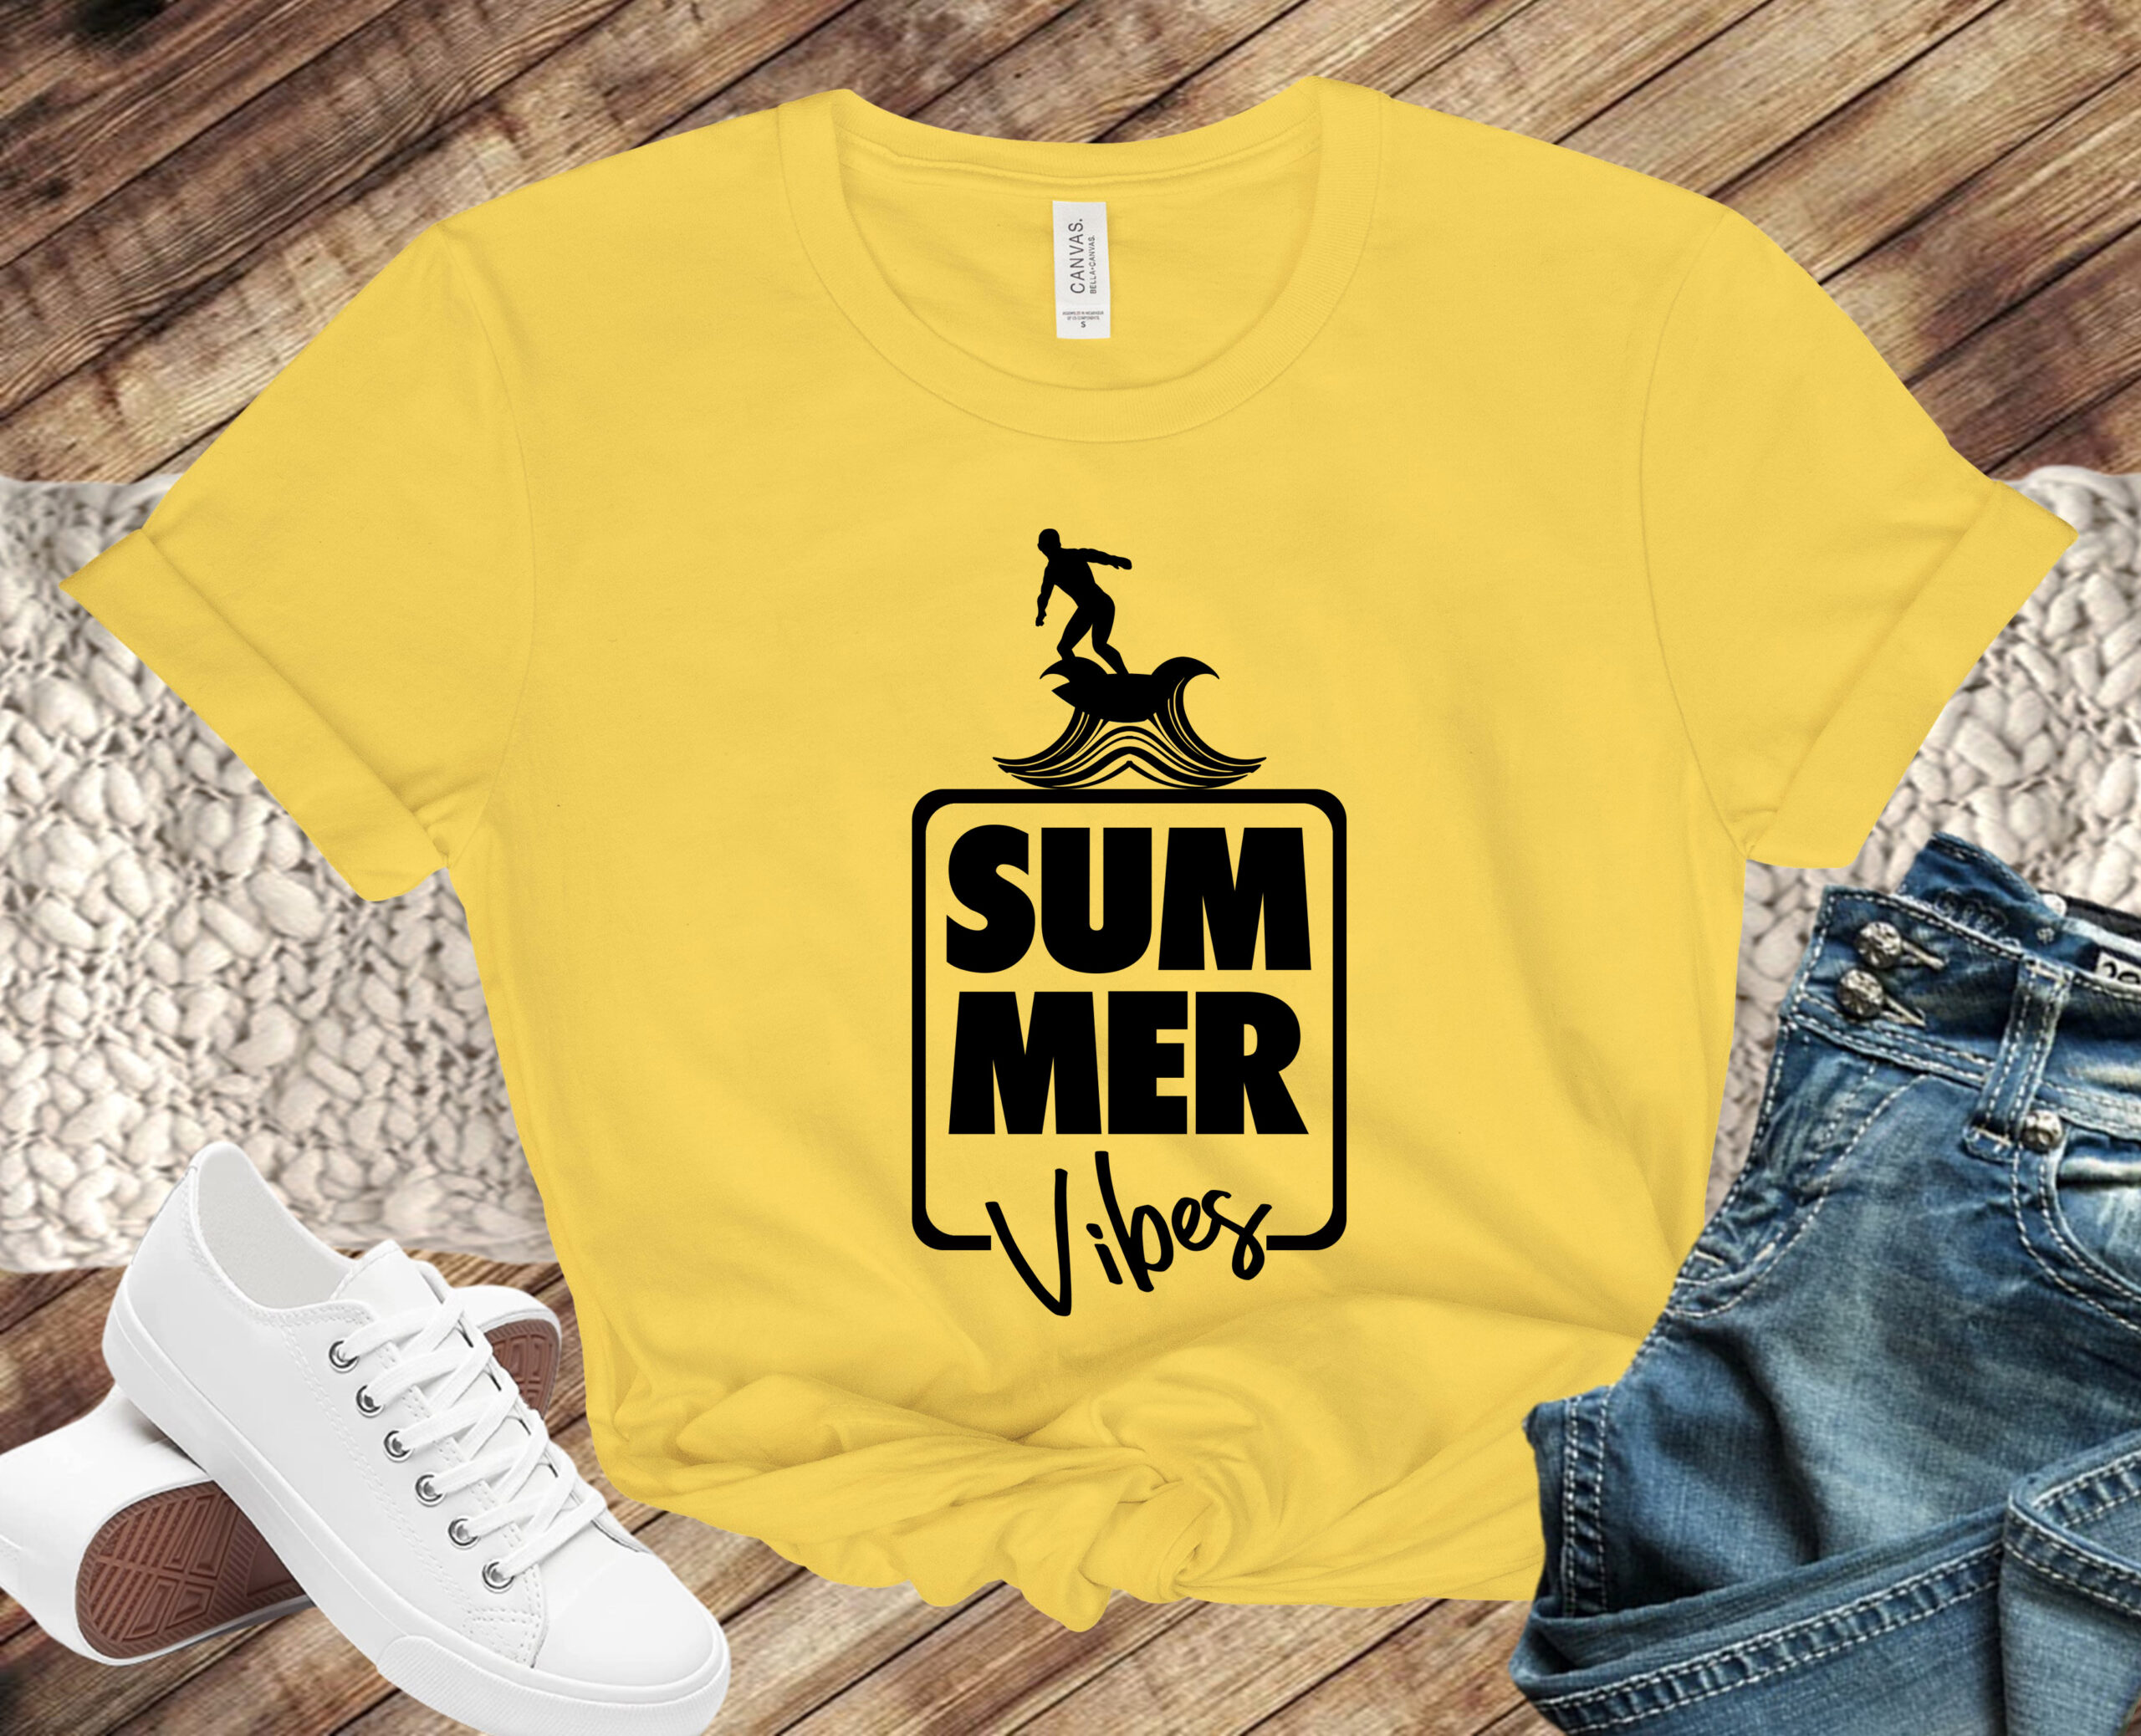 Free Summer Vibes SVG File written on a yellow T shirt.